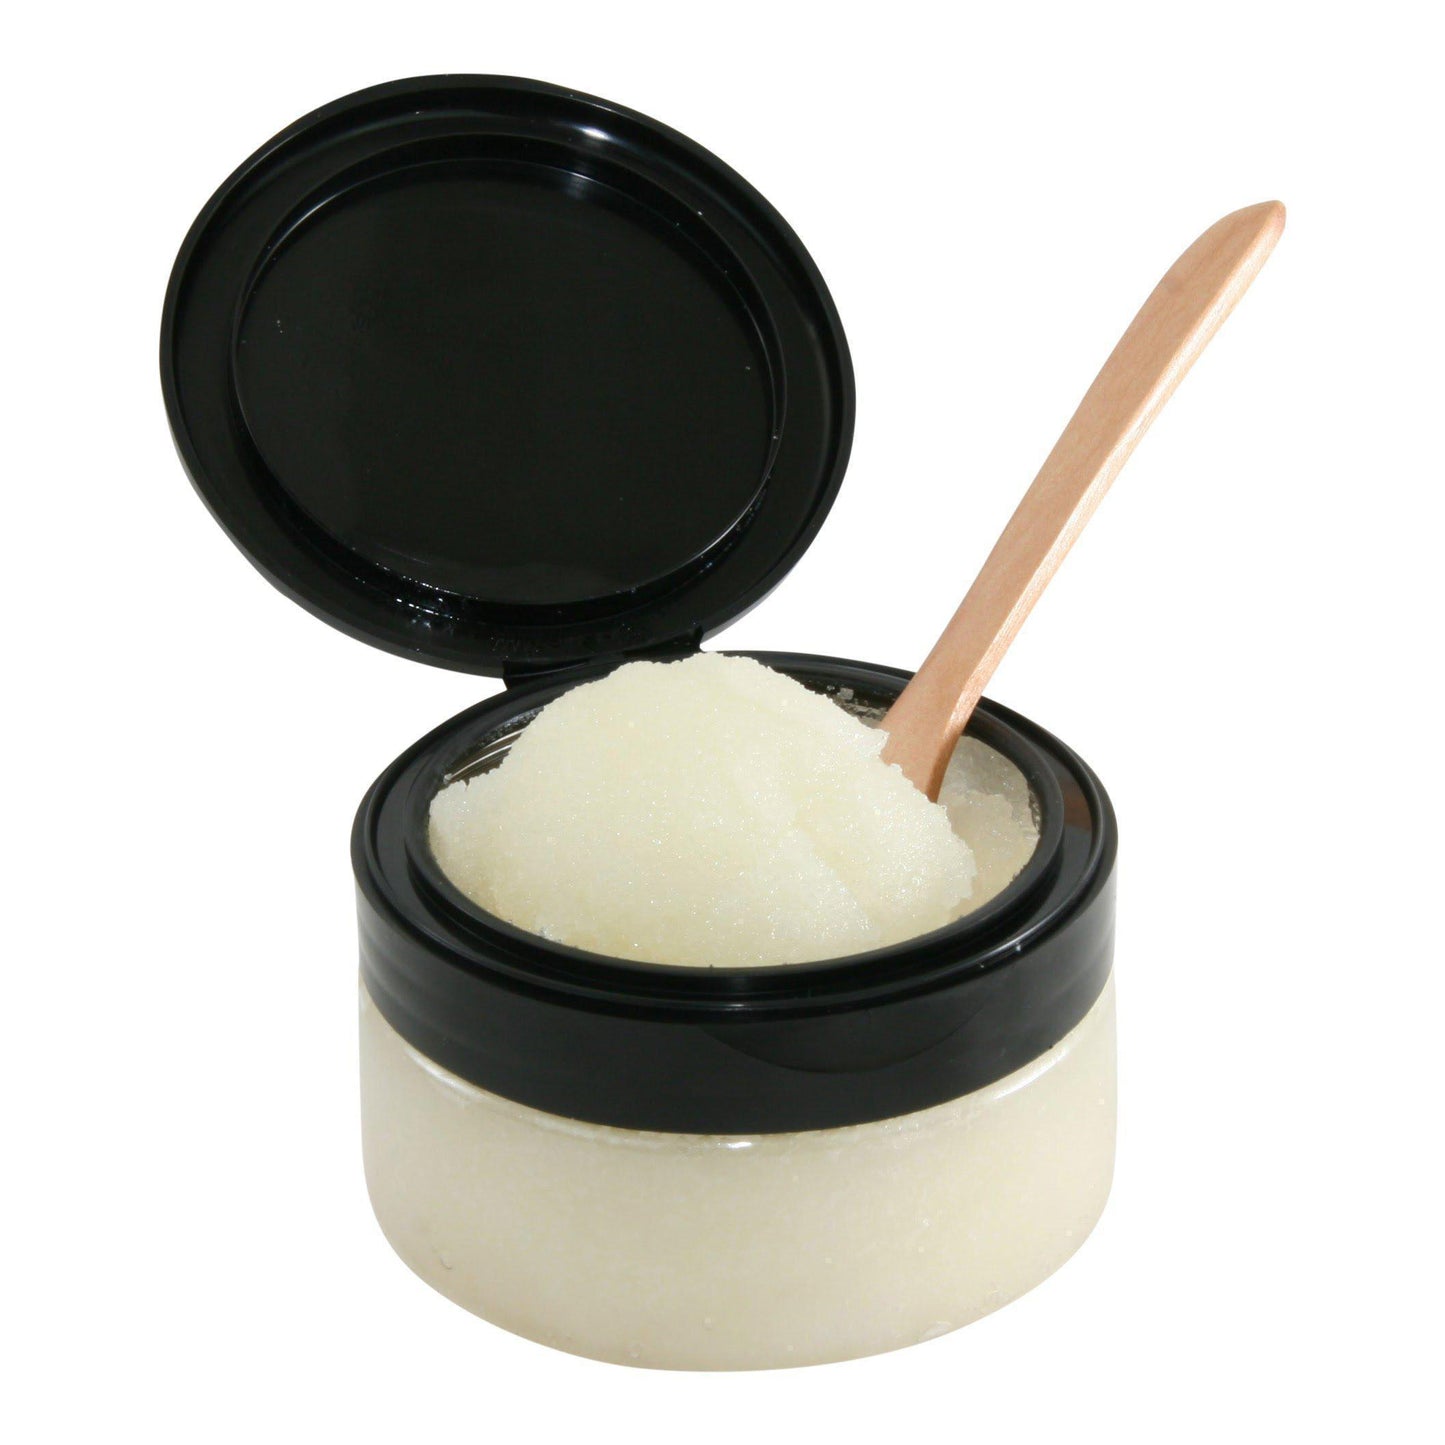 Perfectly You Special Order Gentle Exfoliating Sugar Scrub, 10 oz-Perfectly You-Perfectly Natural Soap